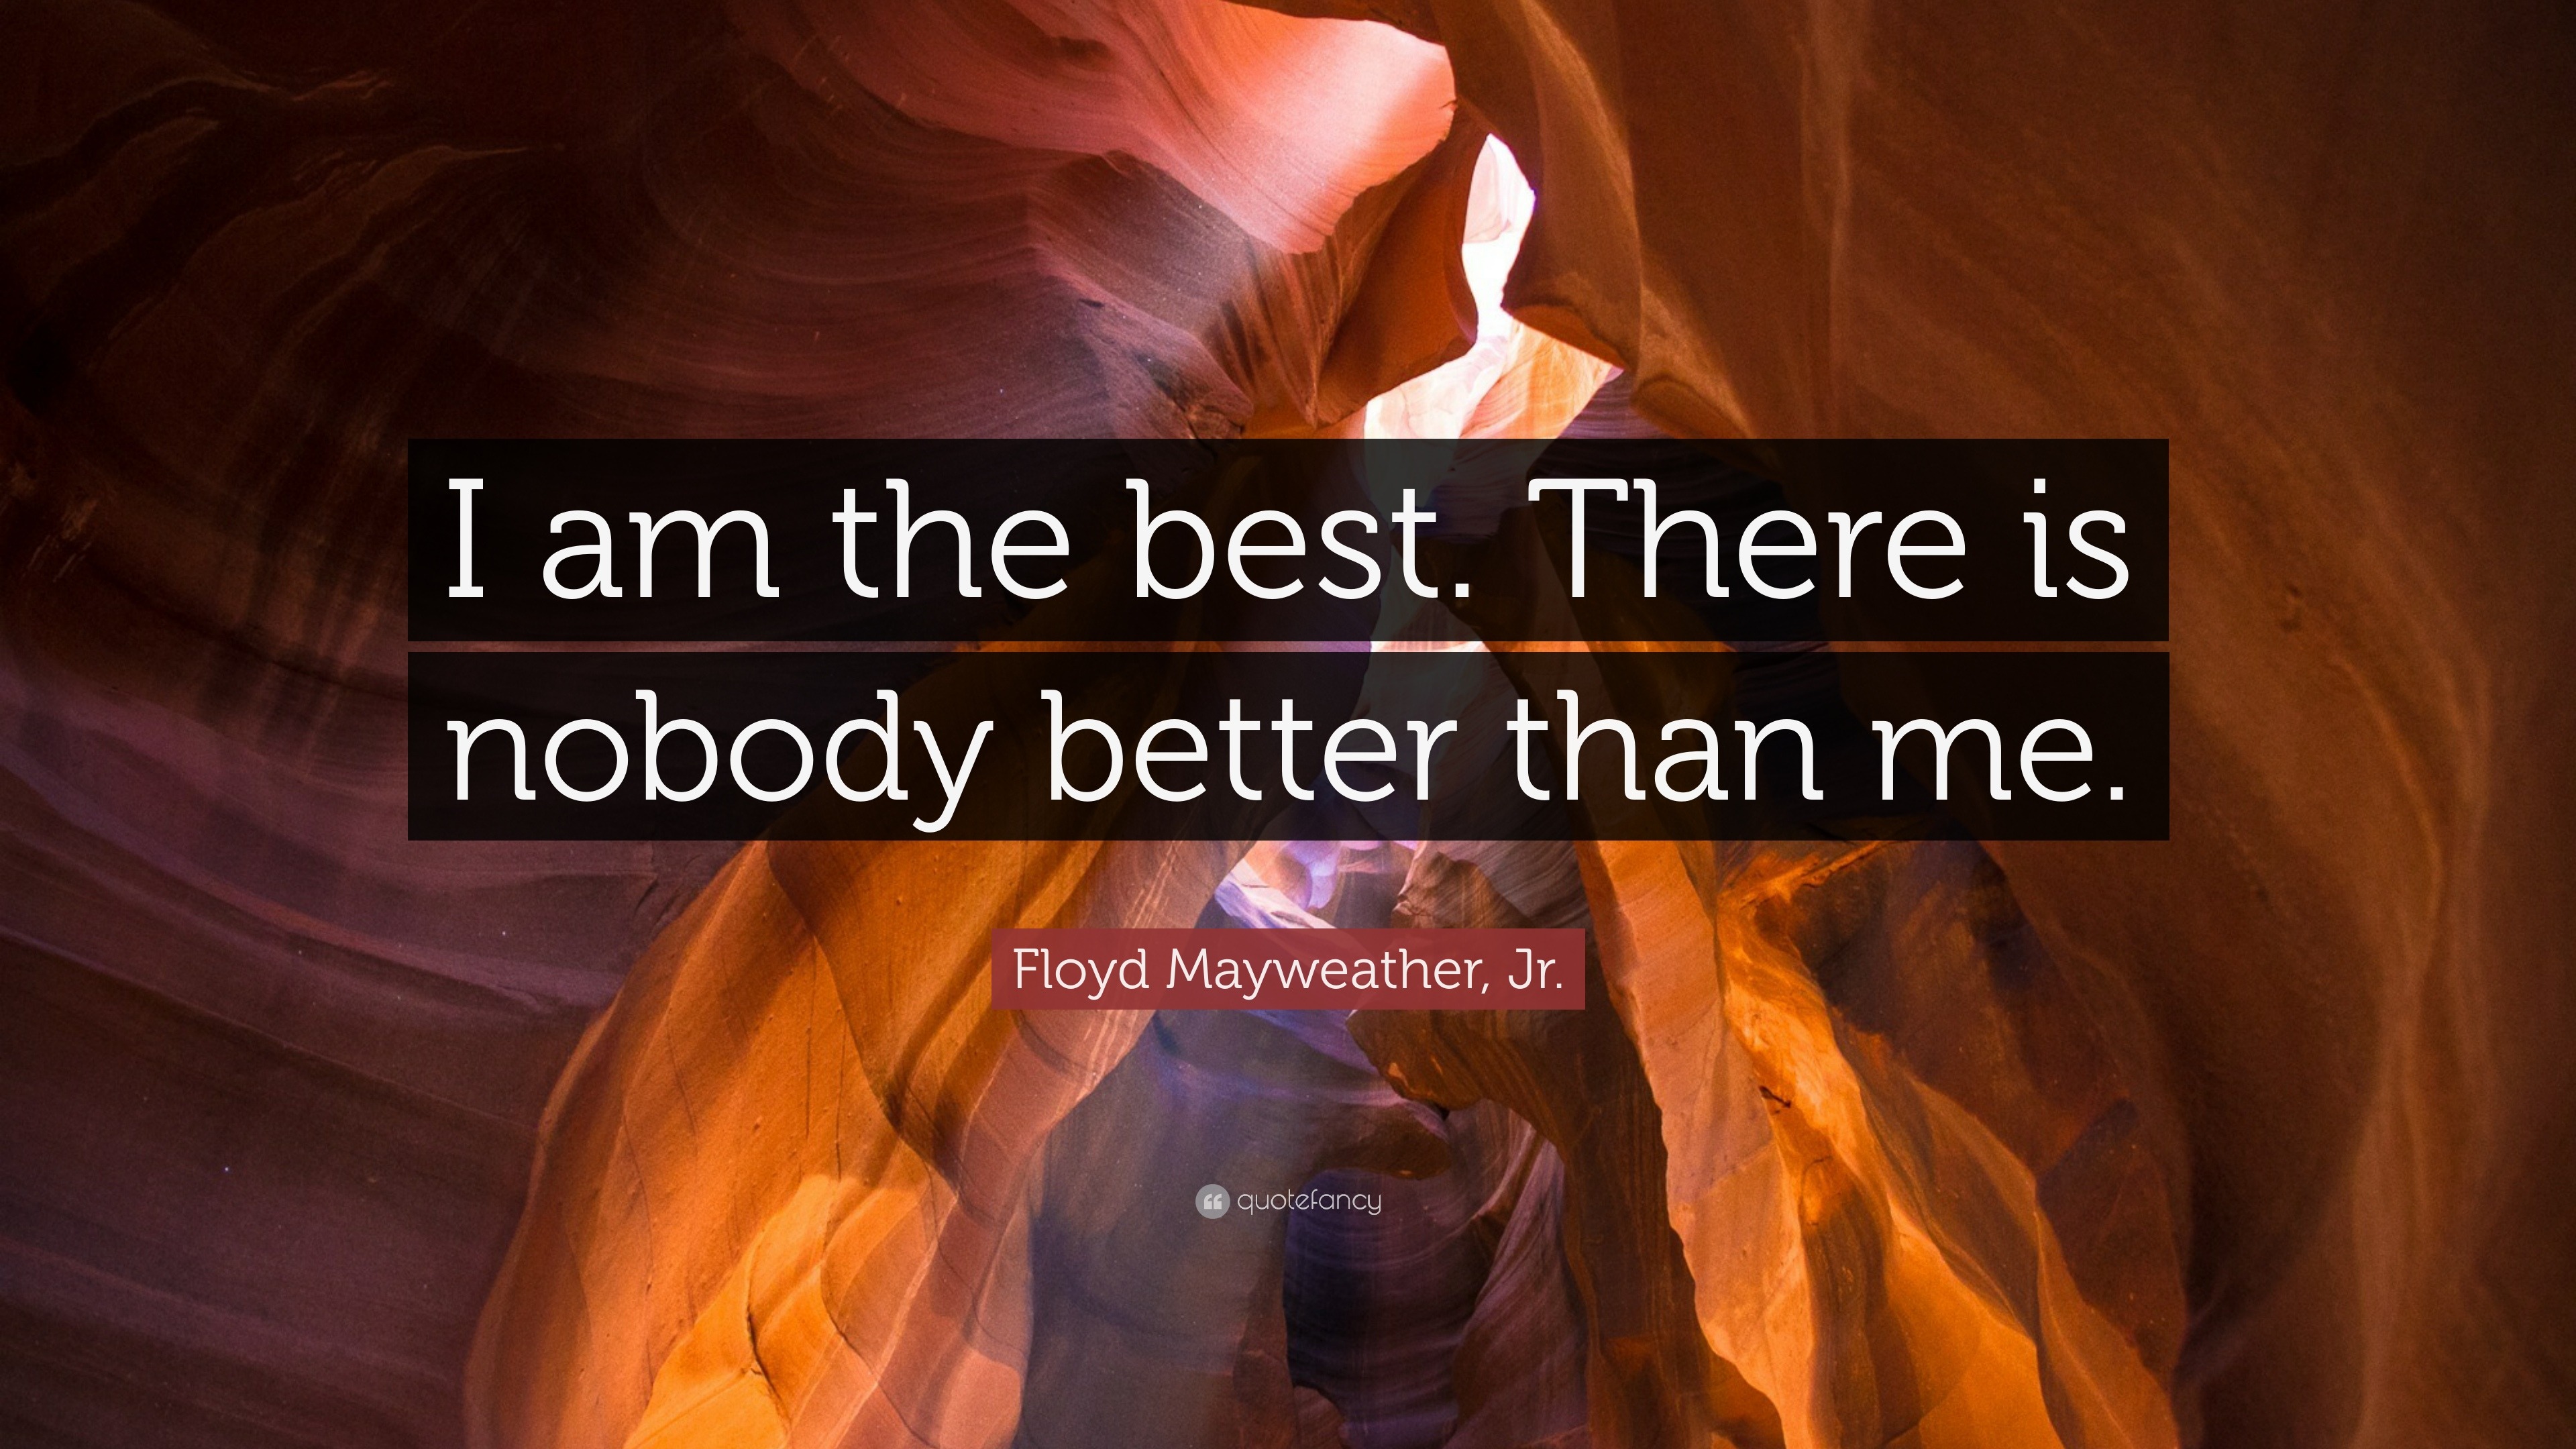 Floyd Mayweather, Jr. Quote: “I am the best. There is nobody better